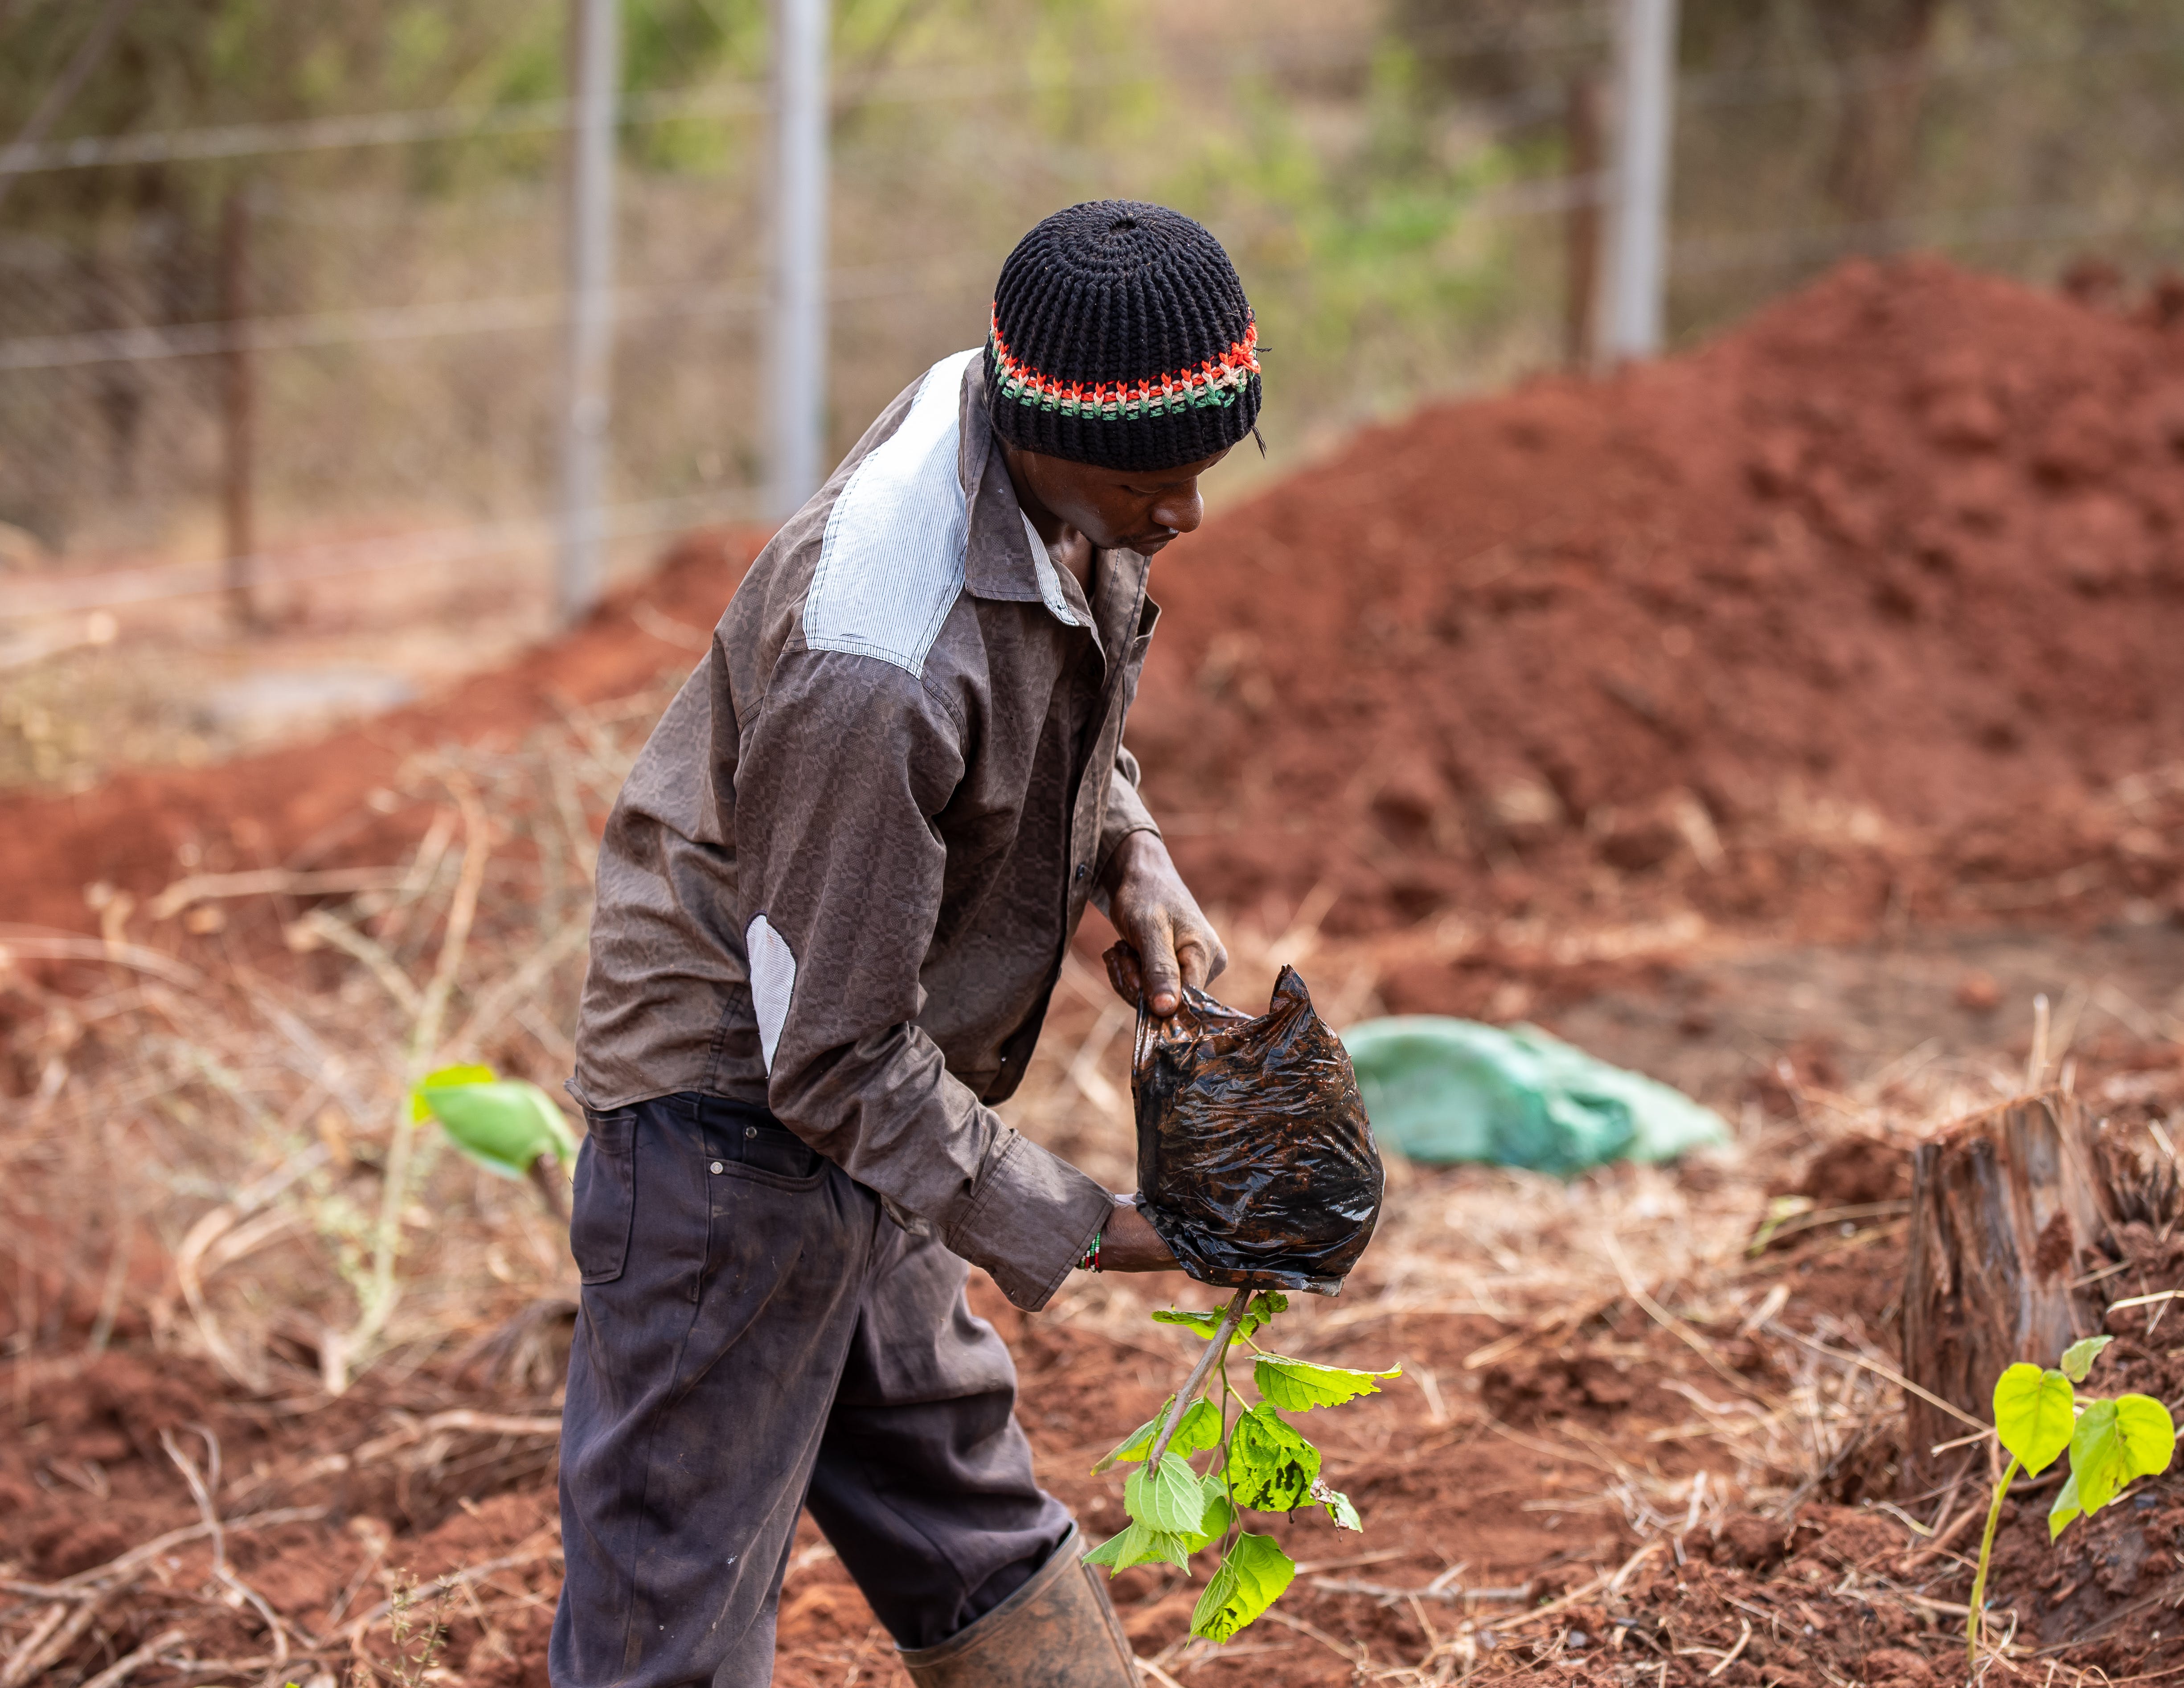 Man planting a young tree or sapling in a dirt field.